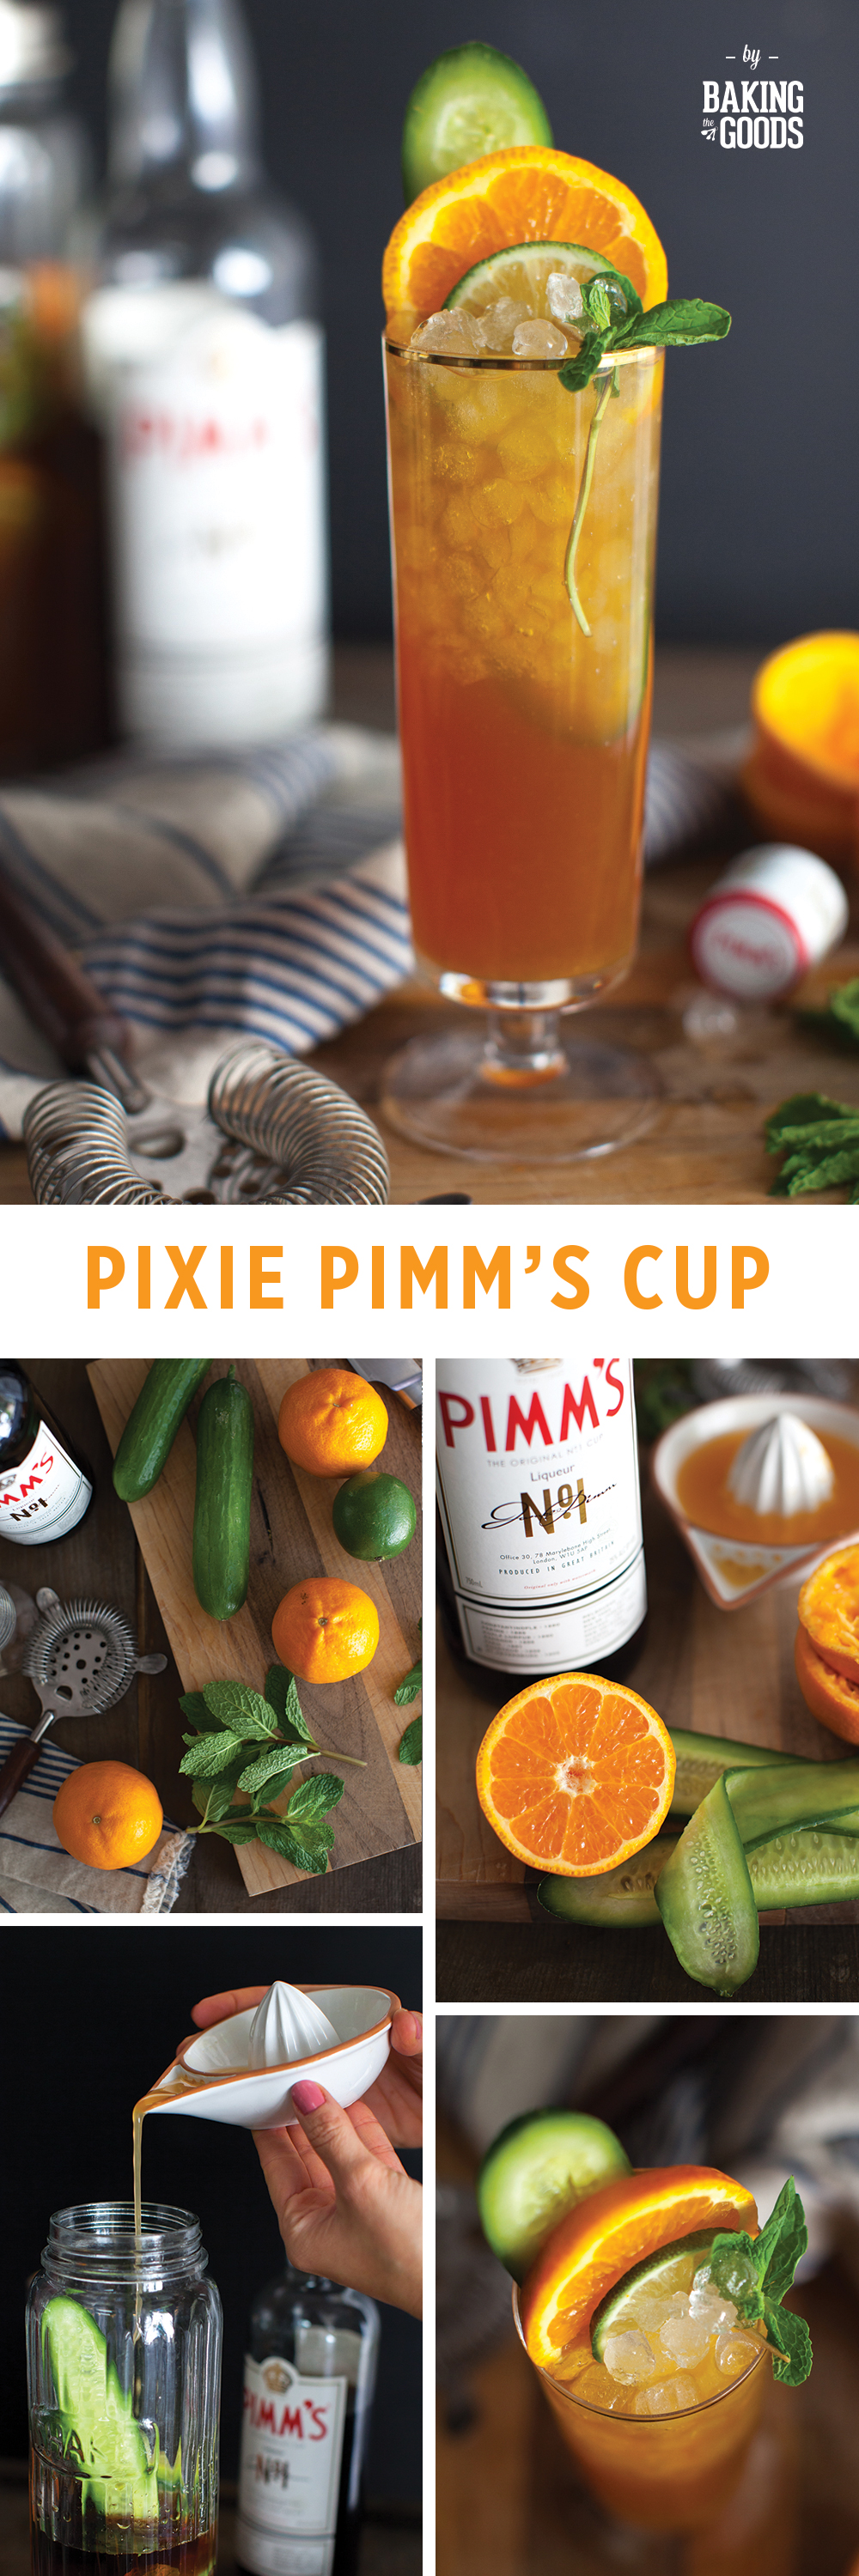 Pixie Pimm's Cup by Baking The Goods